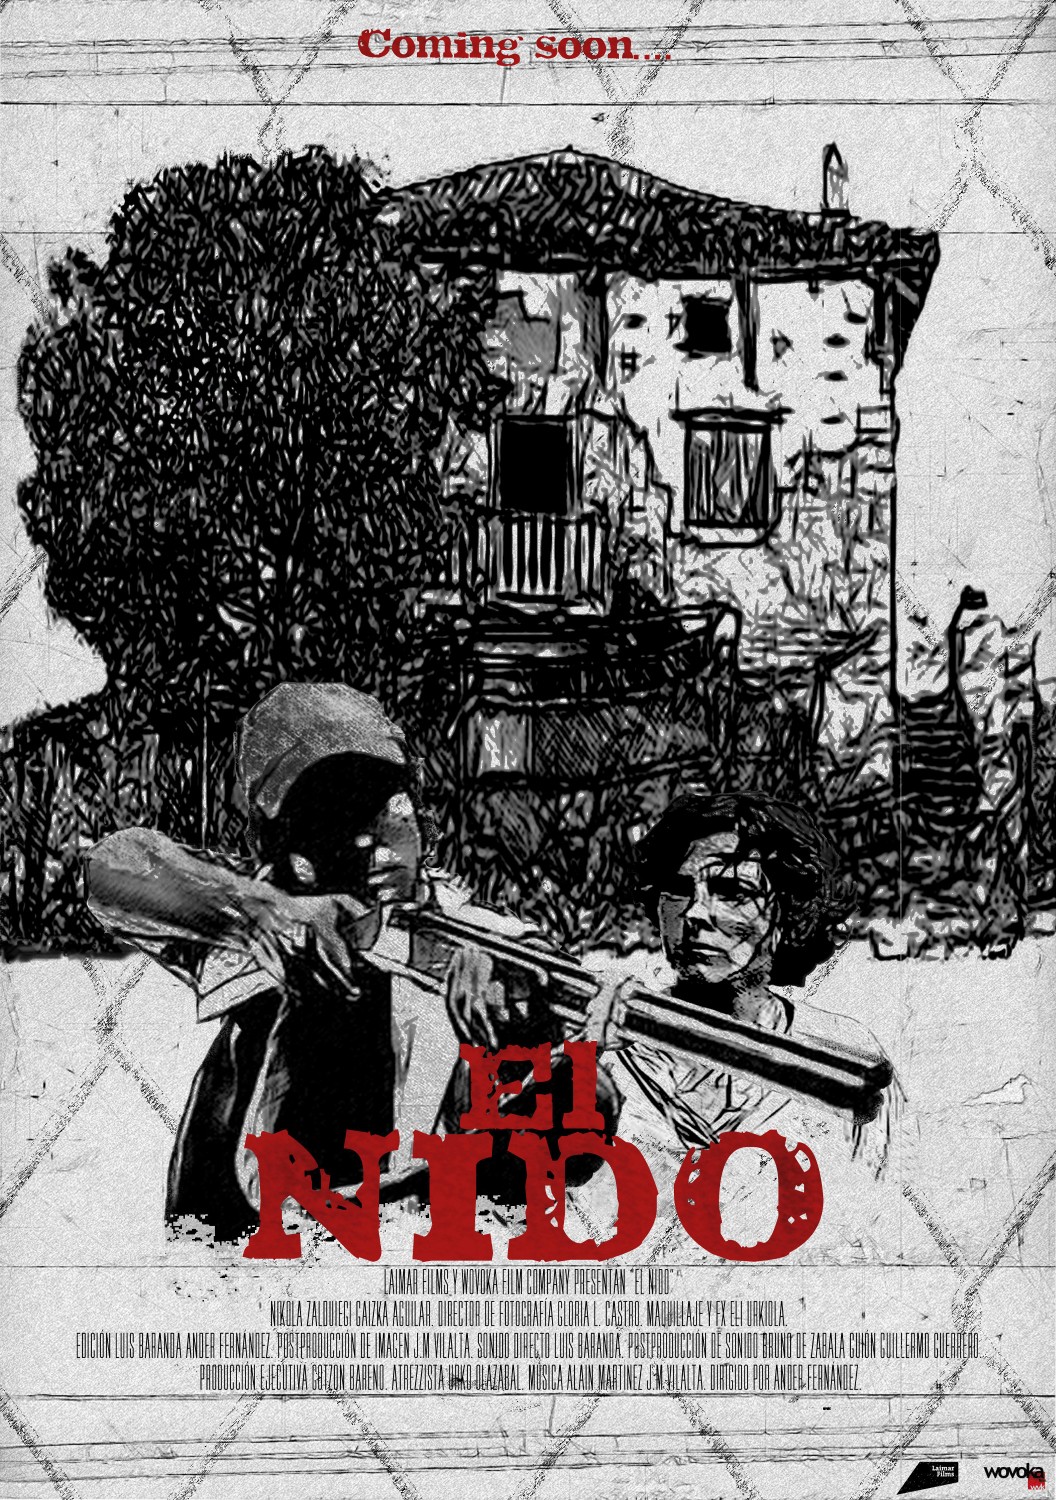 Extra Large Movie Poster Image for El nido